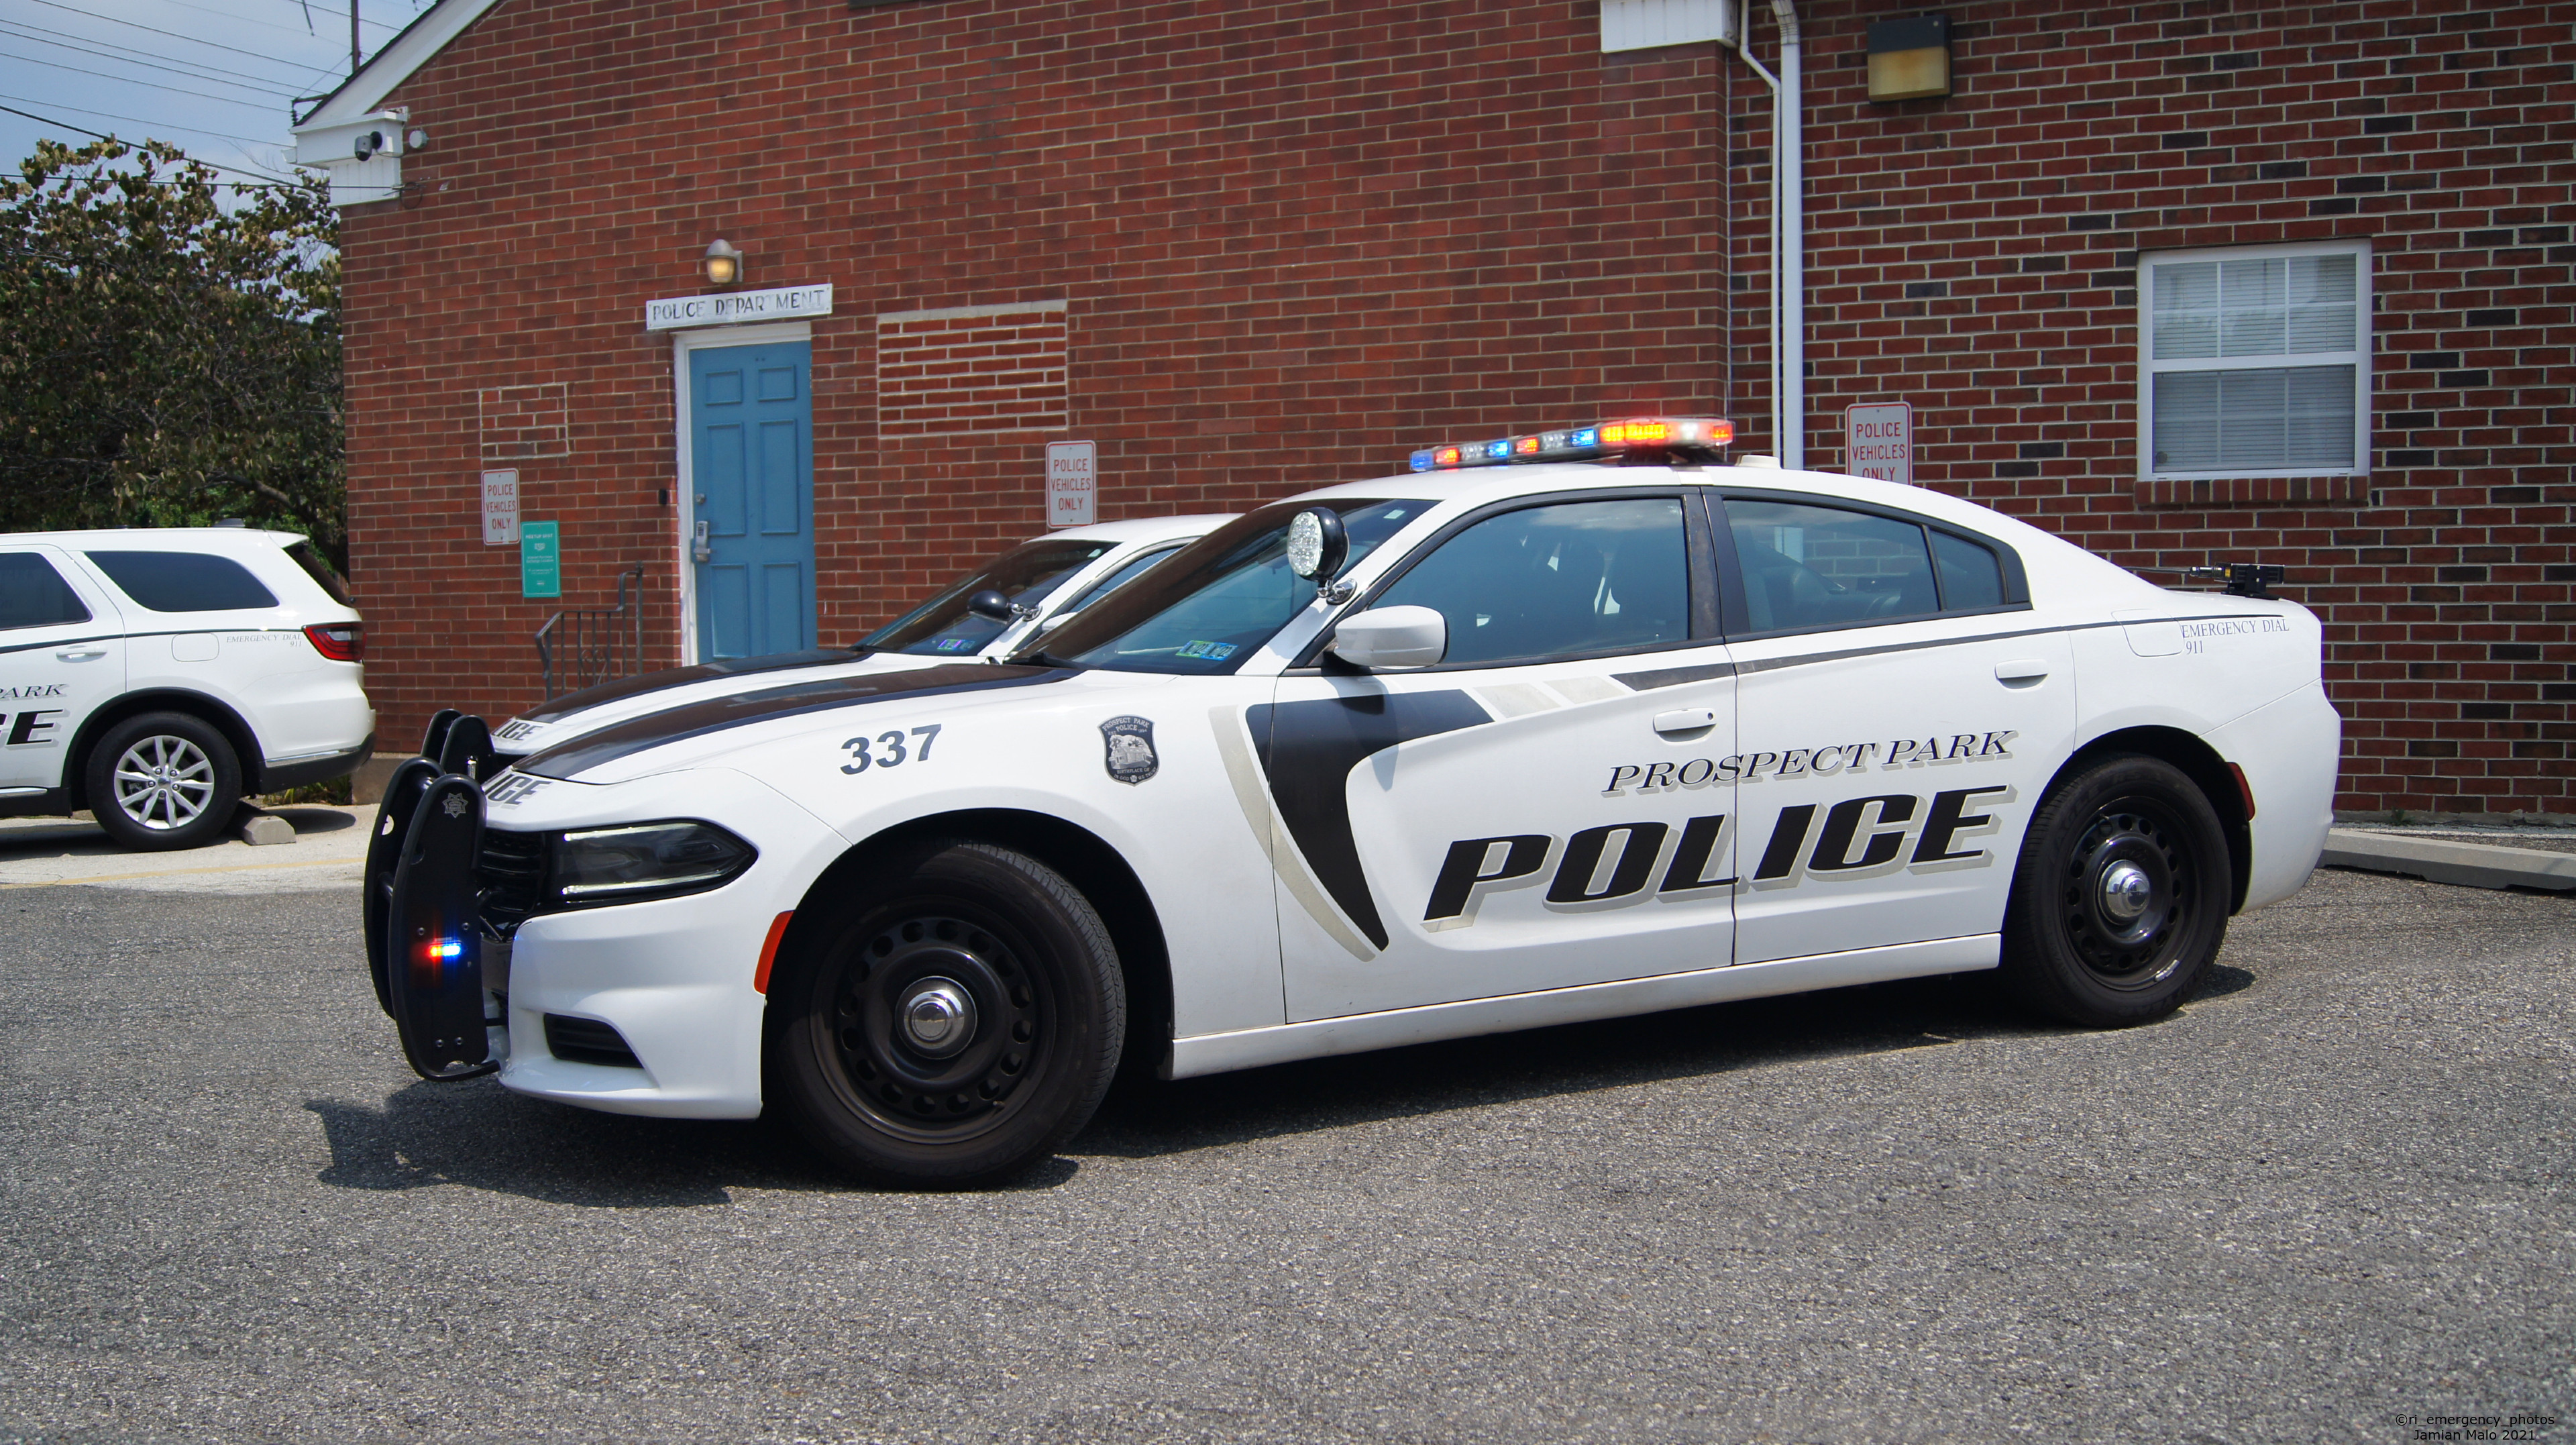 A photo  of Prospect Park Police
            Cruiser 337, a 2015-2020 Dodge Charger             taken by Jamian Malo